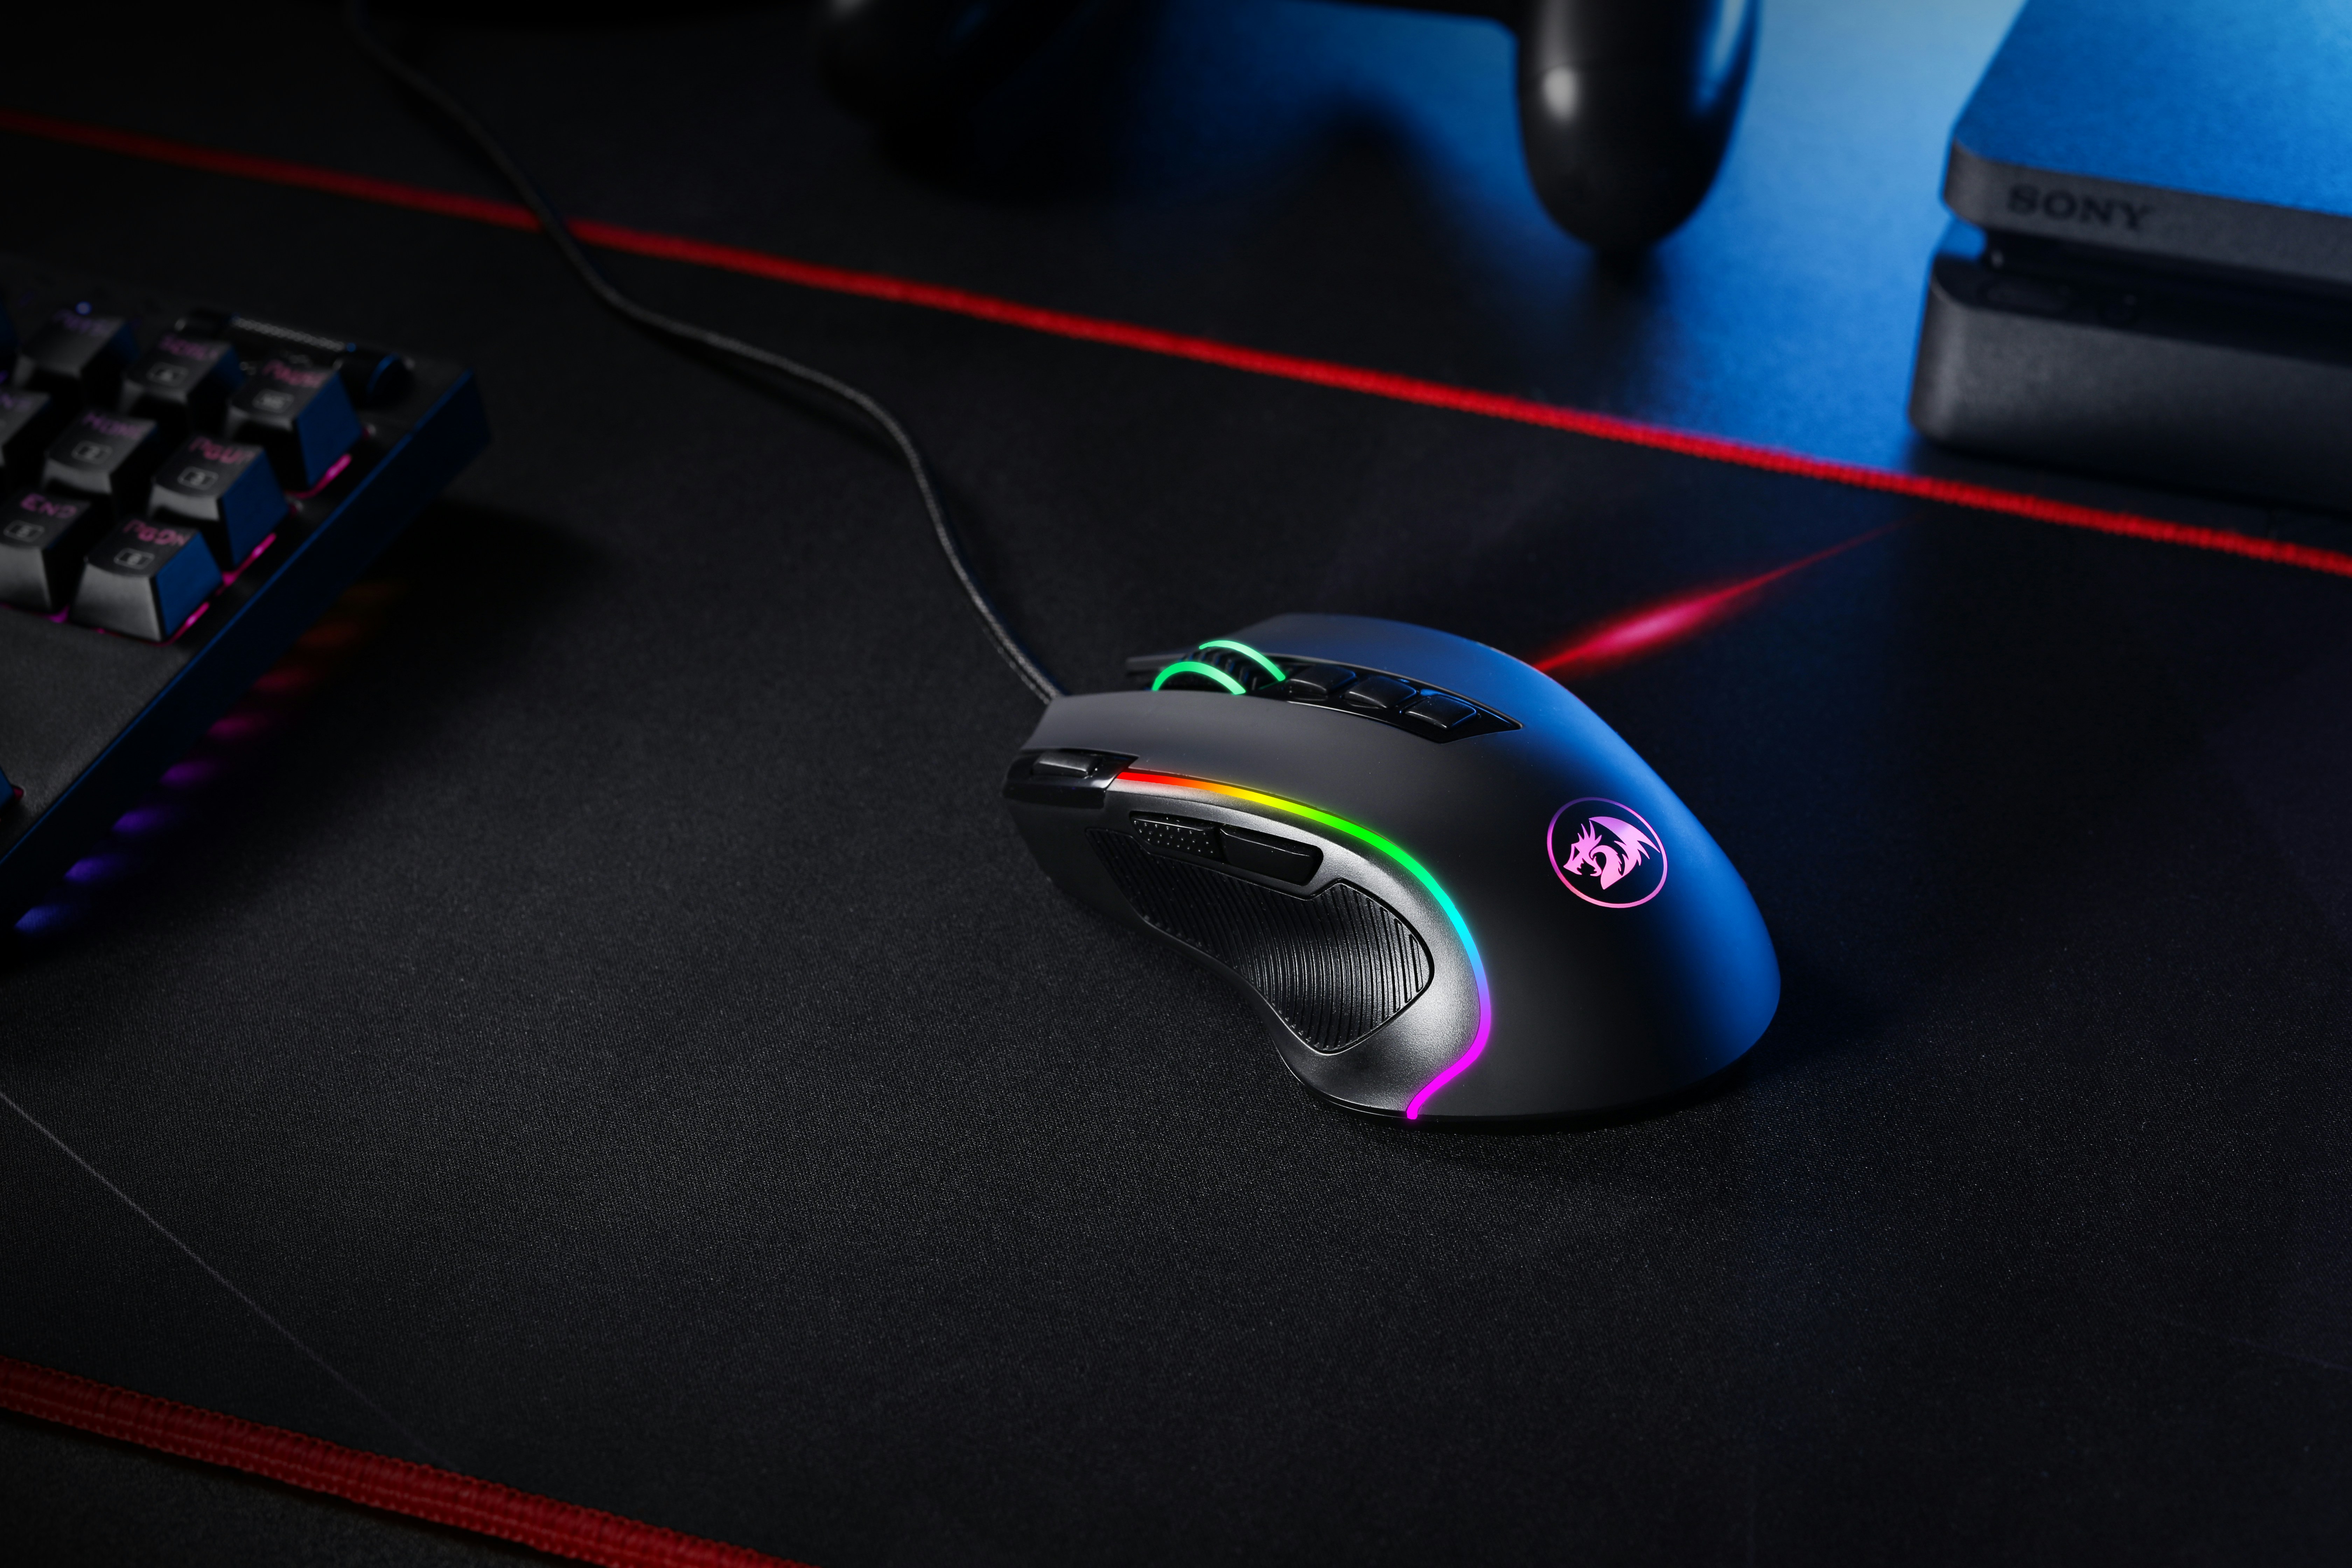 What Is the Cheap Gaming Mouse for Drag Clicking- A Review for Top 2 Mice